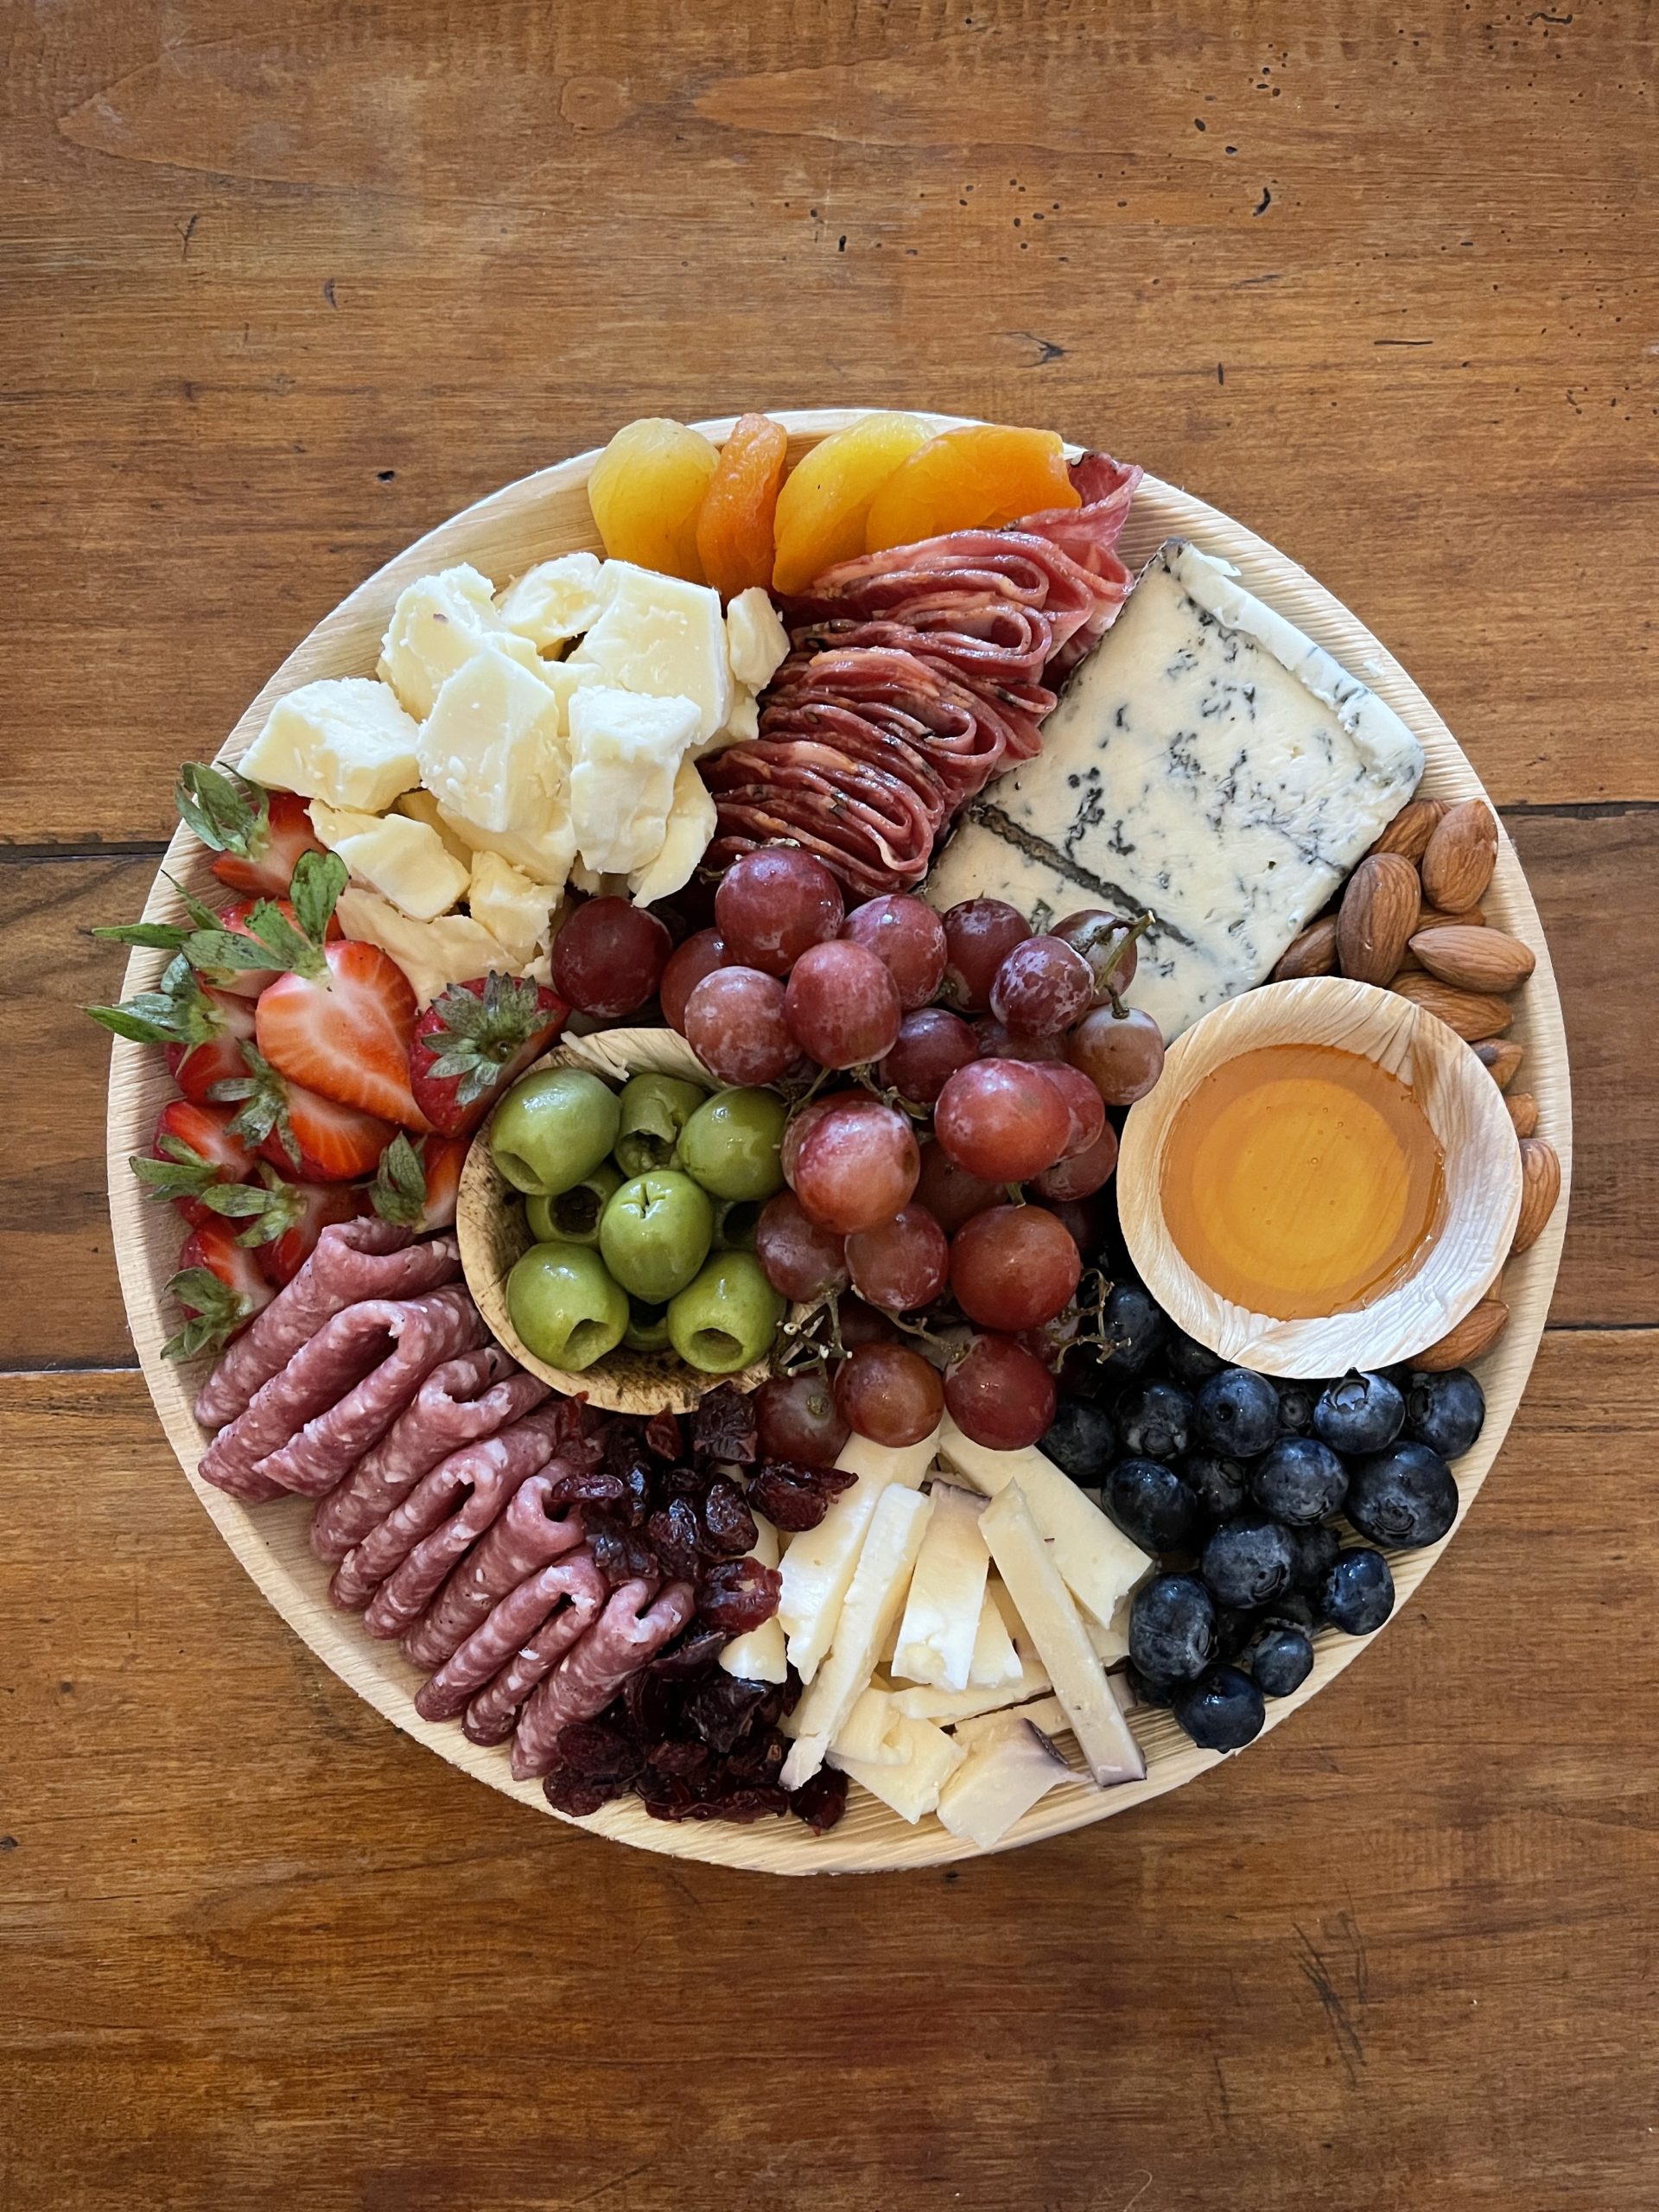 A Martha's Vineyard Cheesery small grazing board, full of cheese, charcuterie, and accompaniments